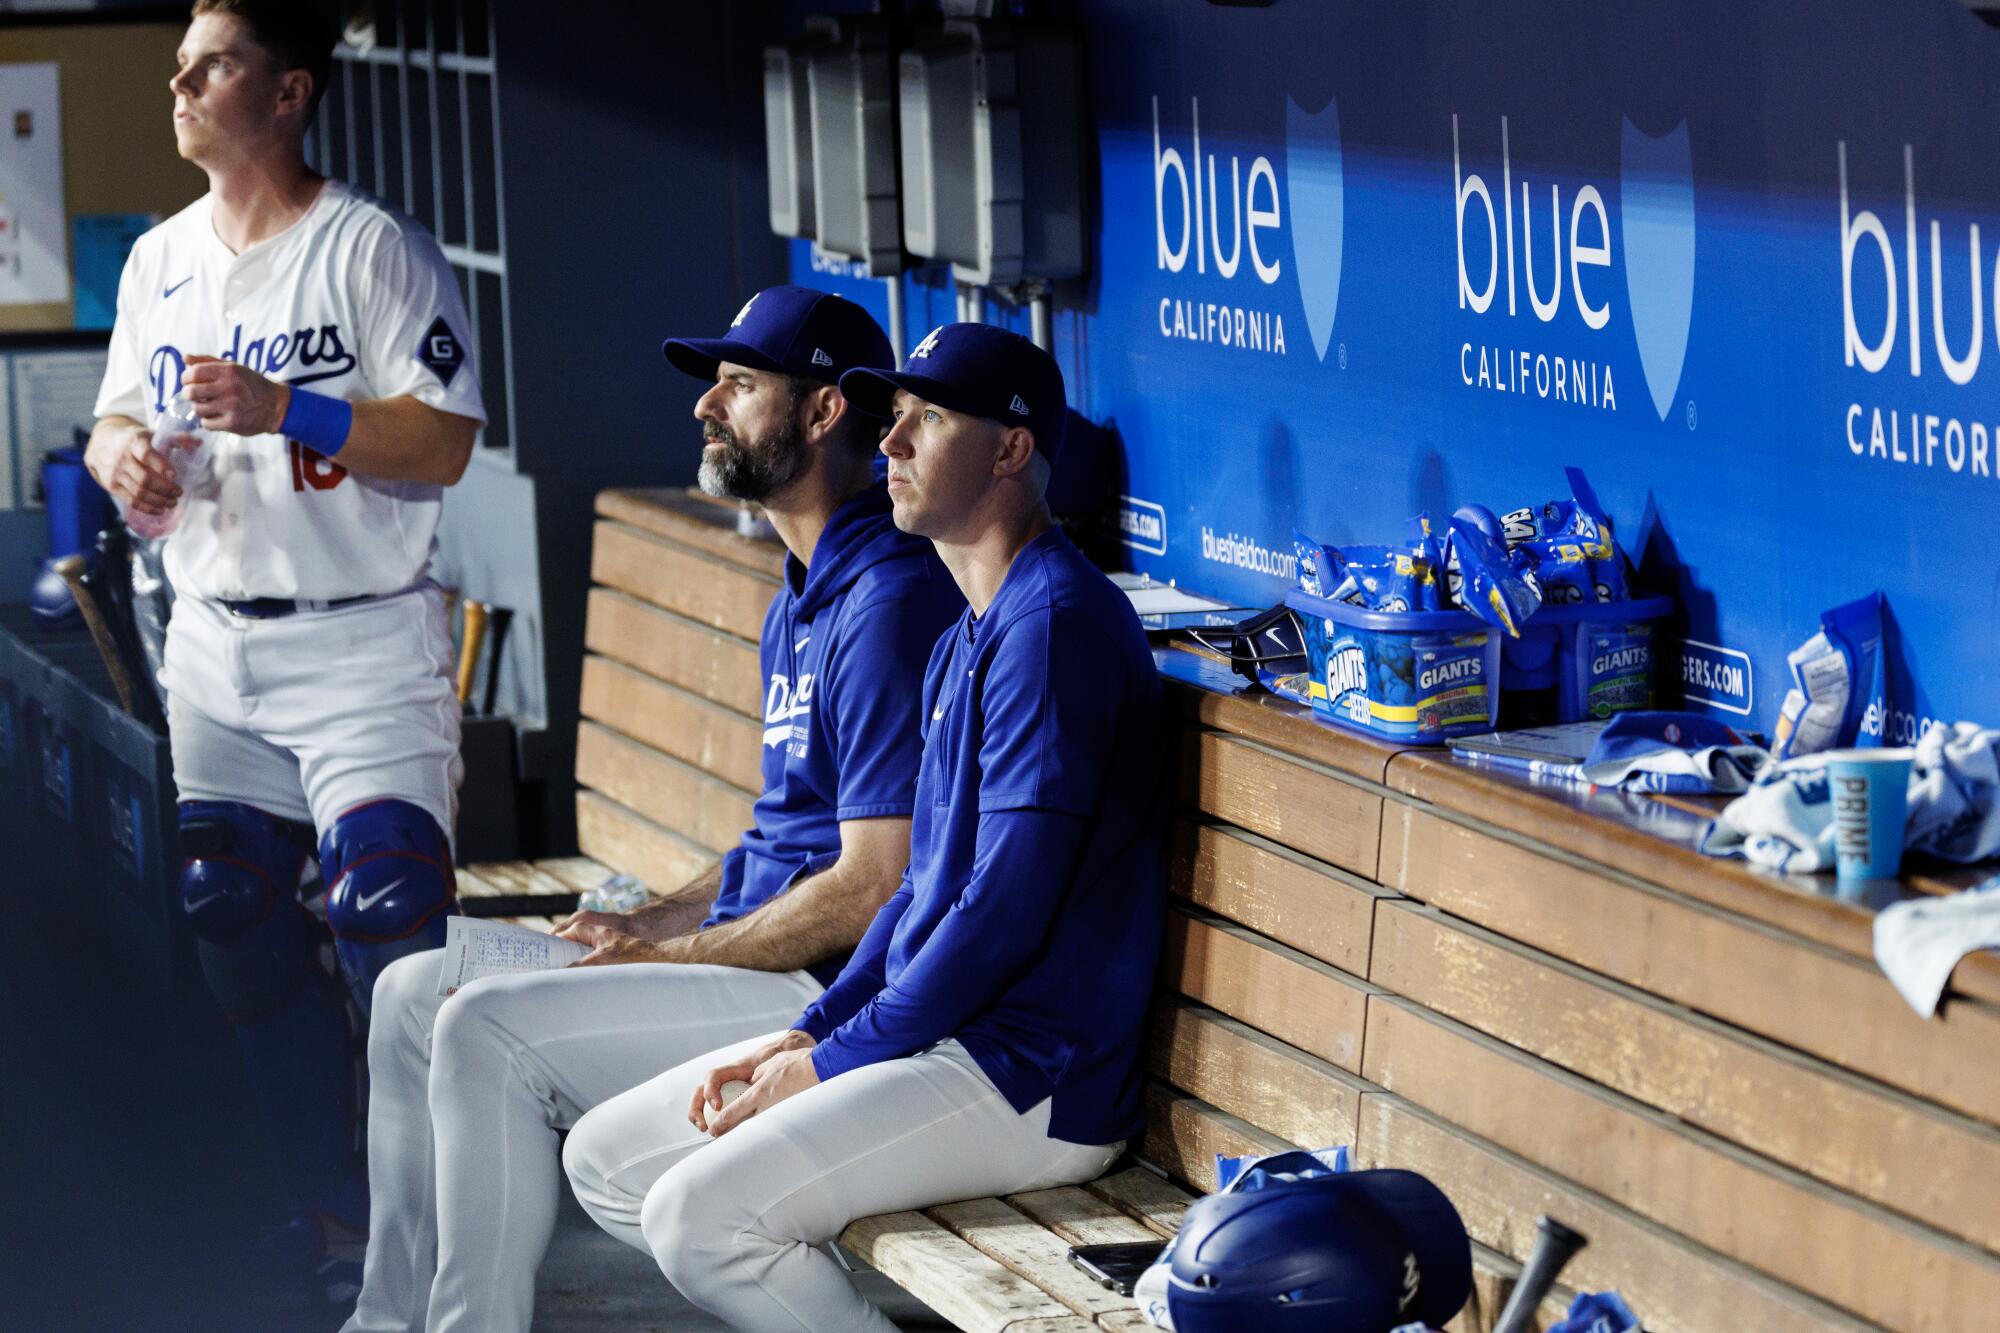 The Dodgers' Walker Buehler sits in the dugout next to pitching coach Mark Prior during Wednesday's game against the Giants.